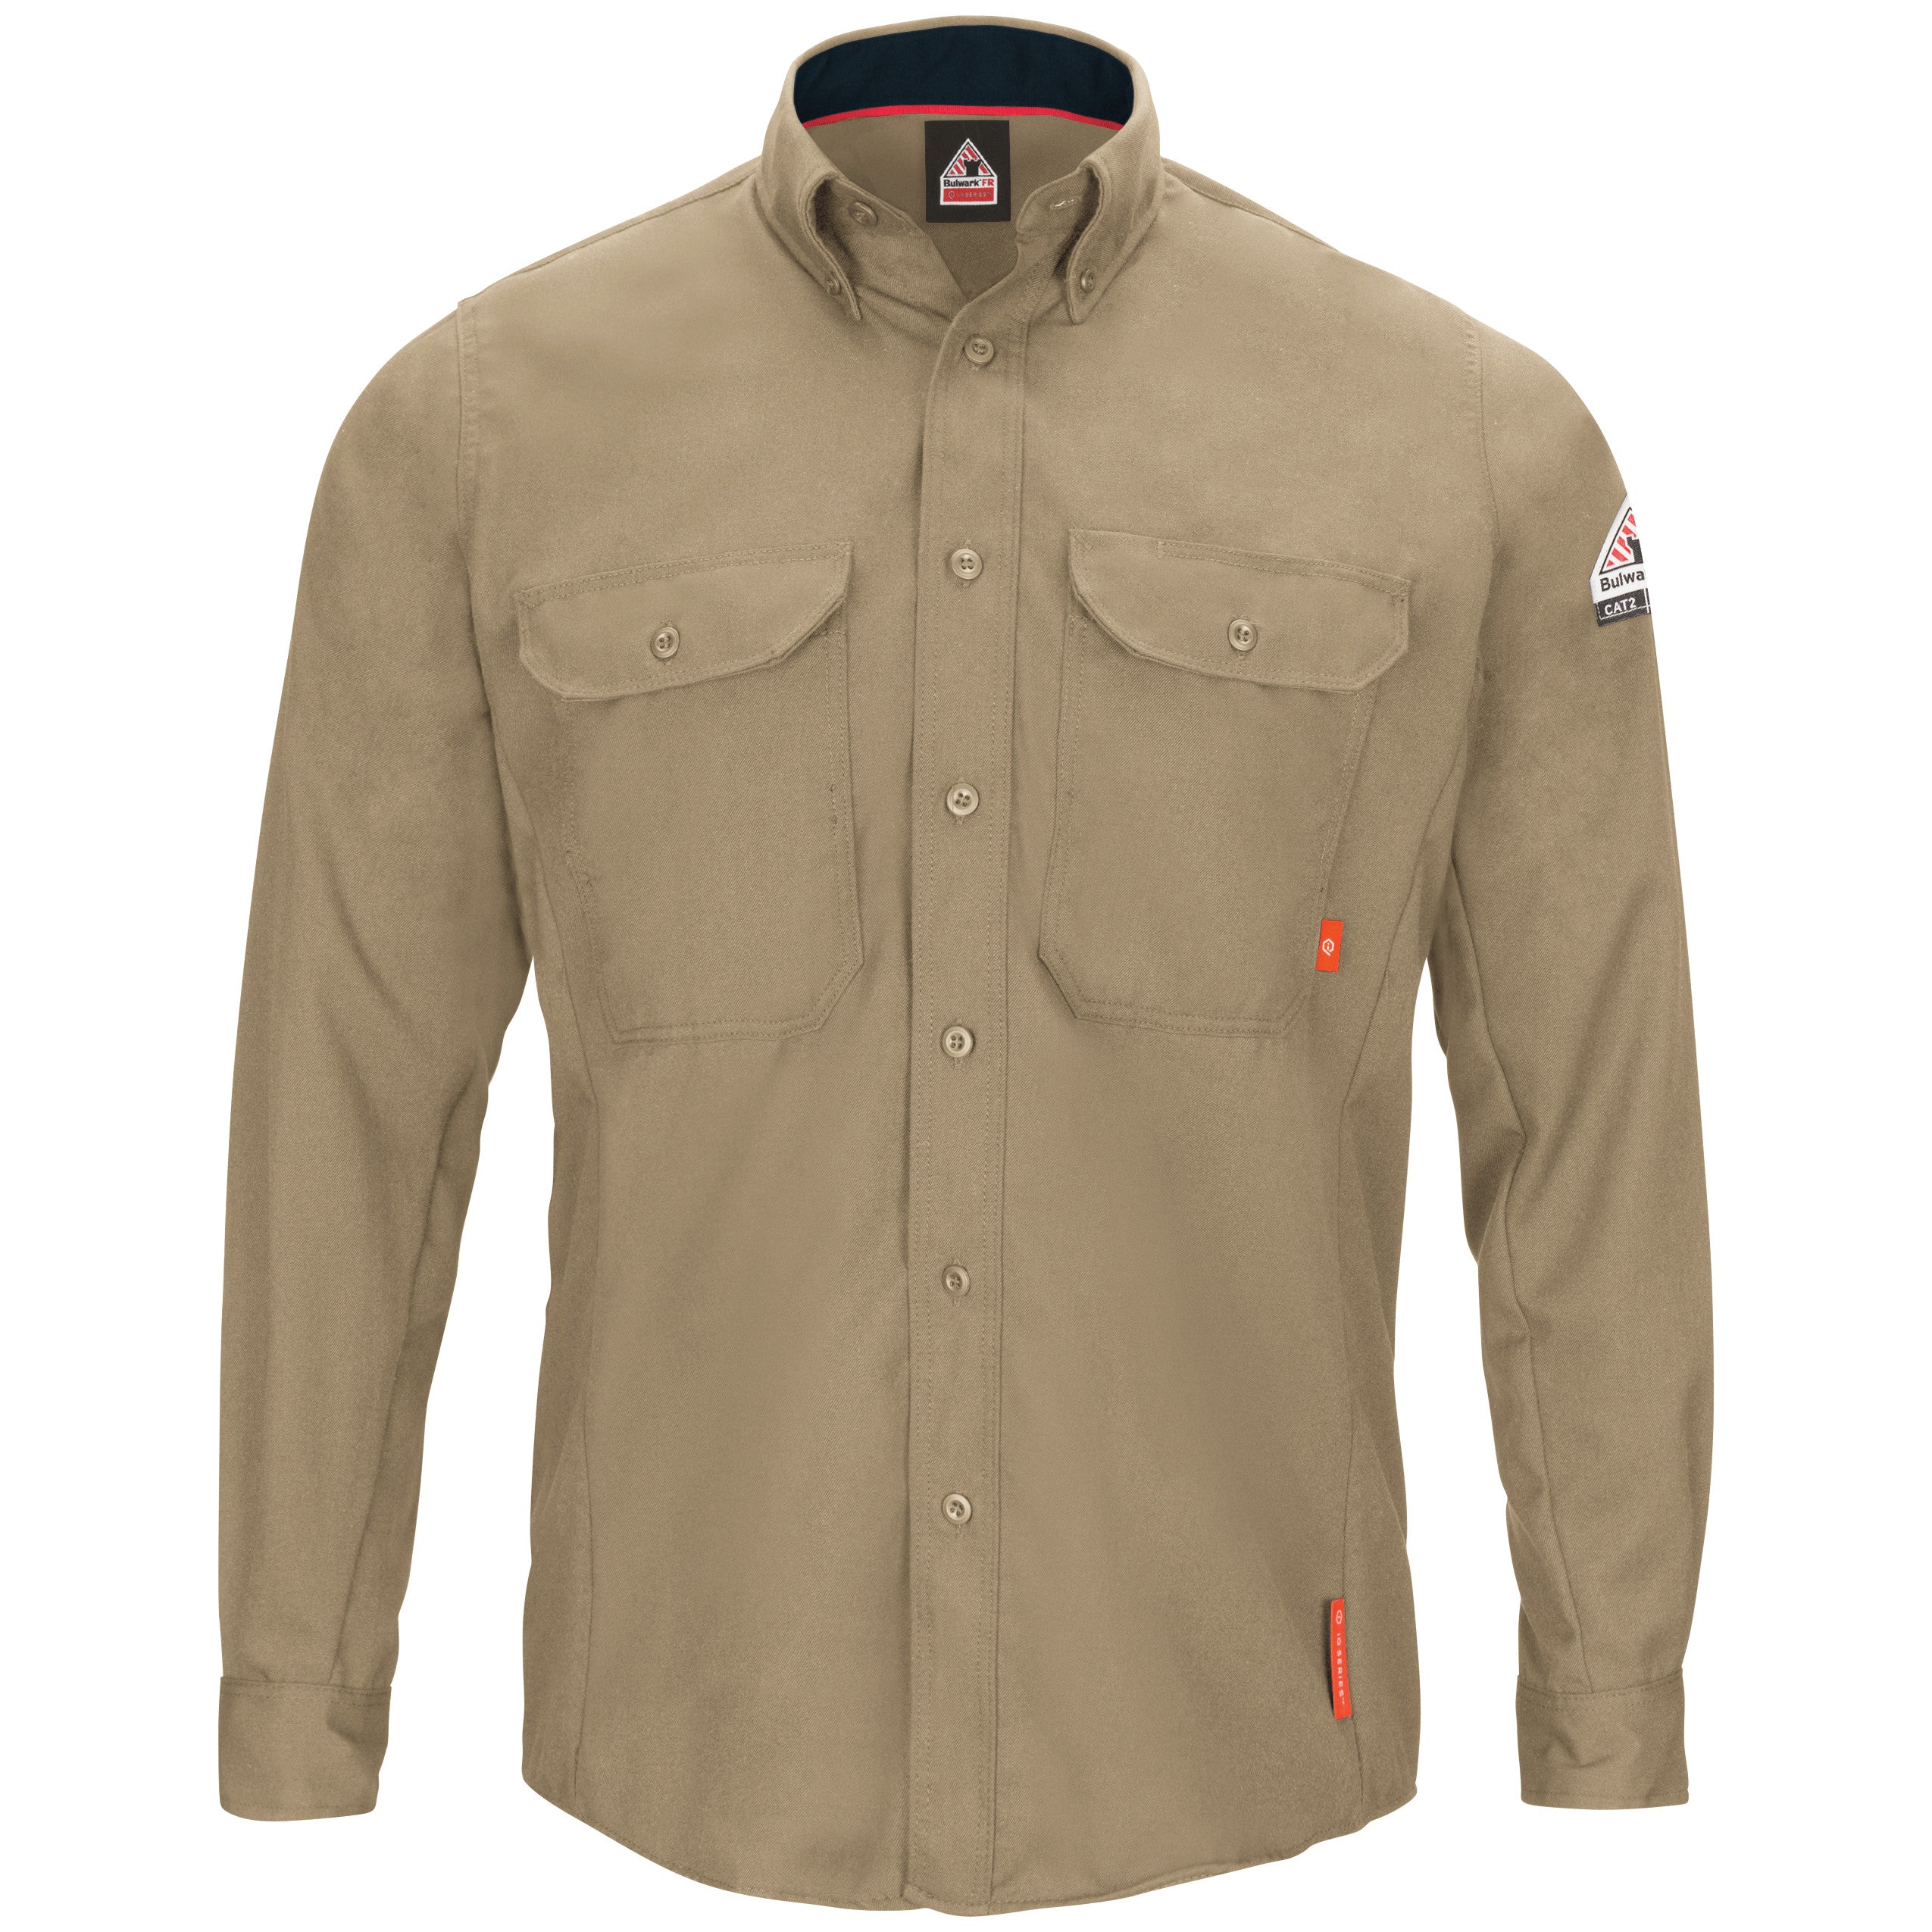 iQ Series® Men's Lightweight Comfort Woven Shirt with Insect Shield QS52 - Khaki-eSafety Supplies, Inc